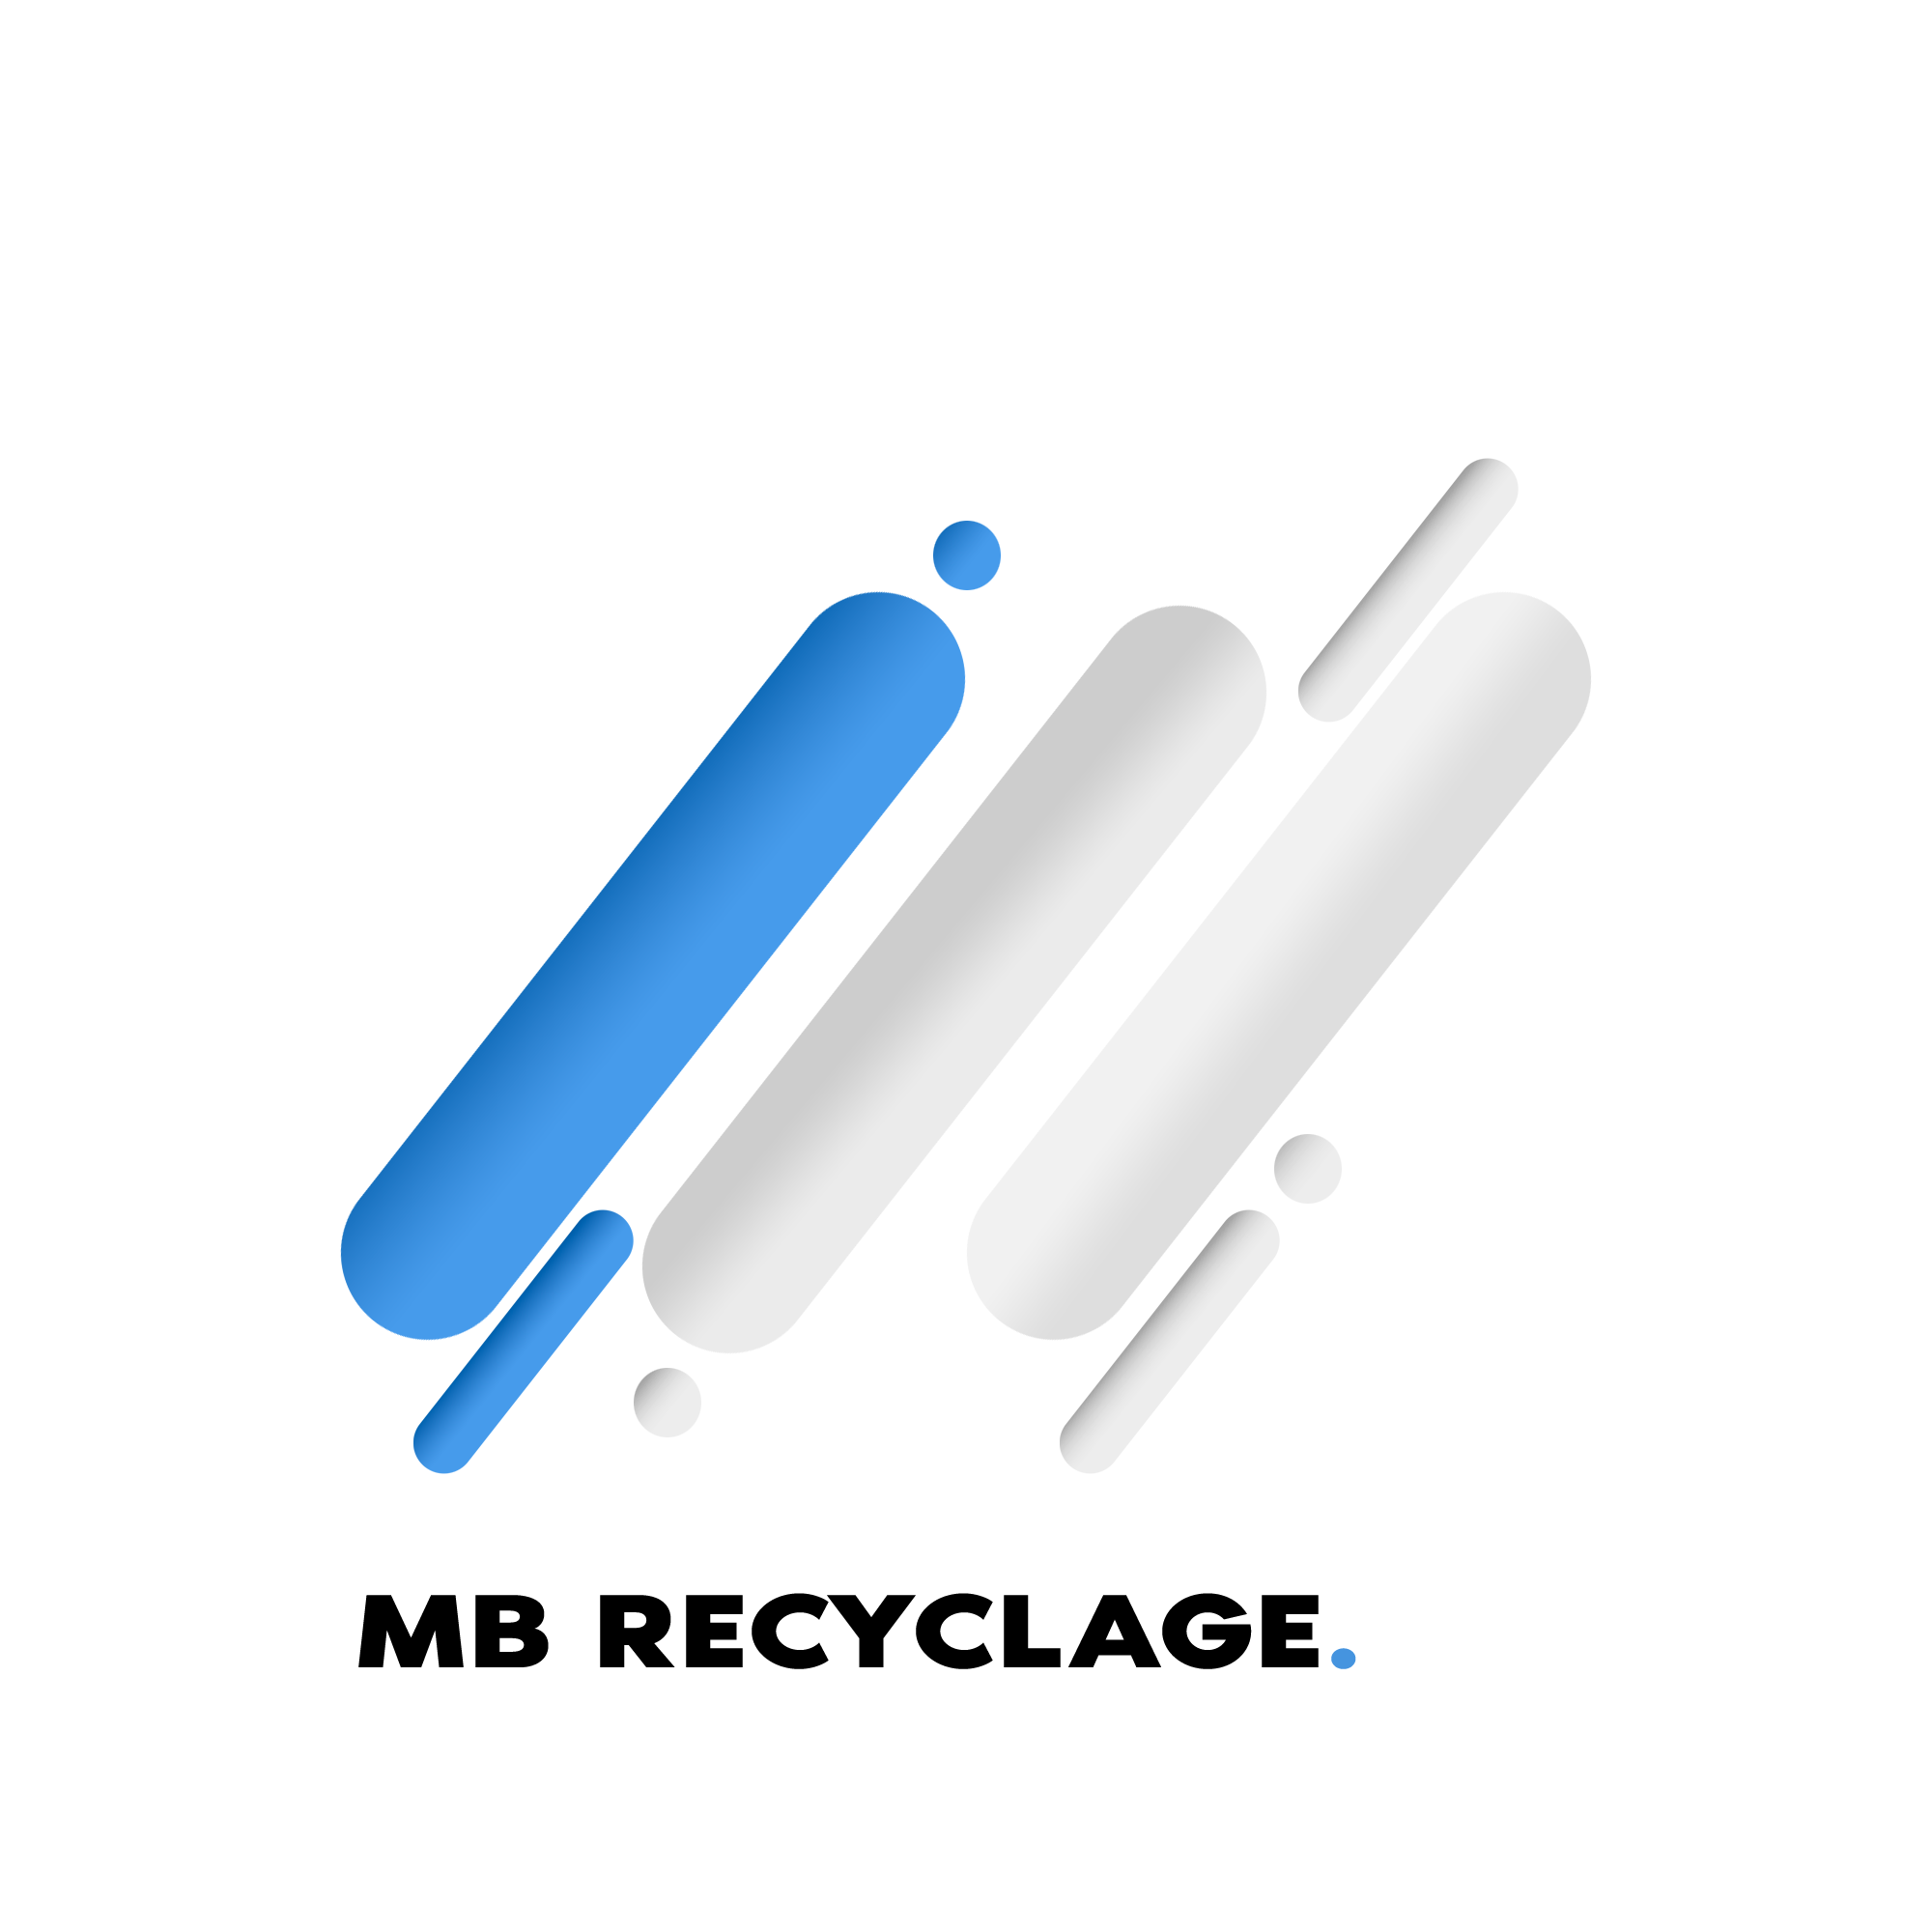 MB Recyclage